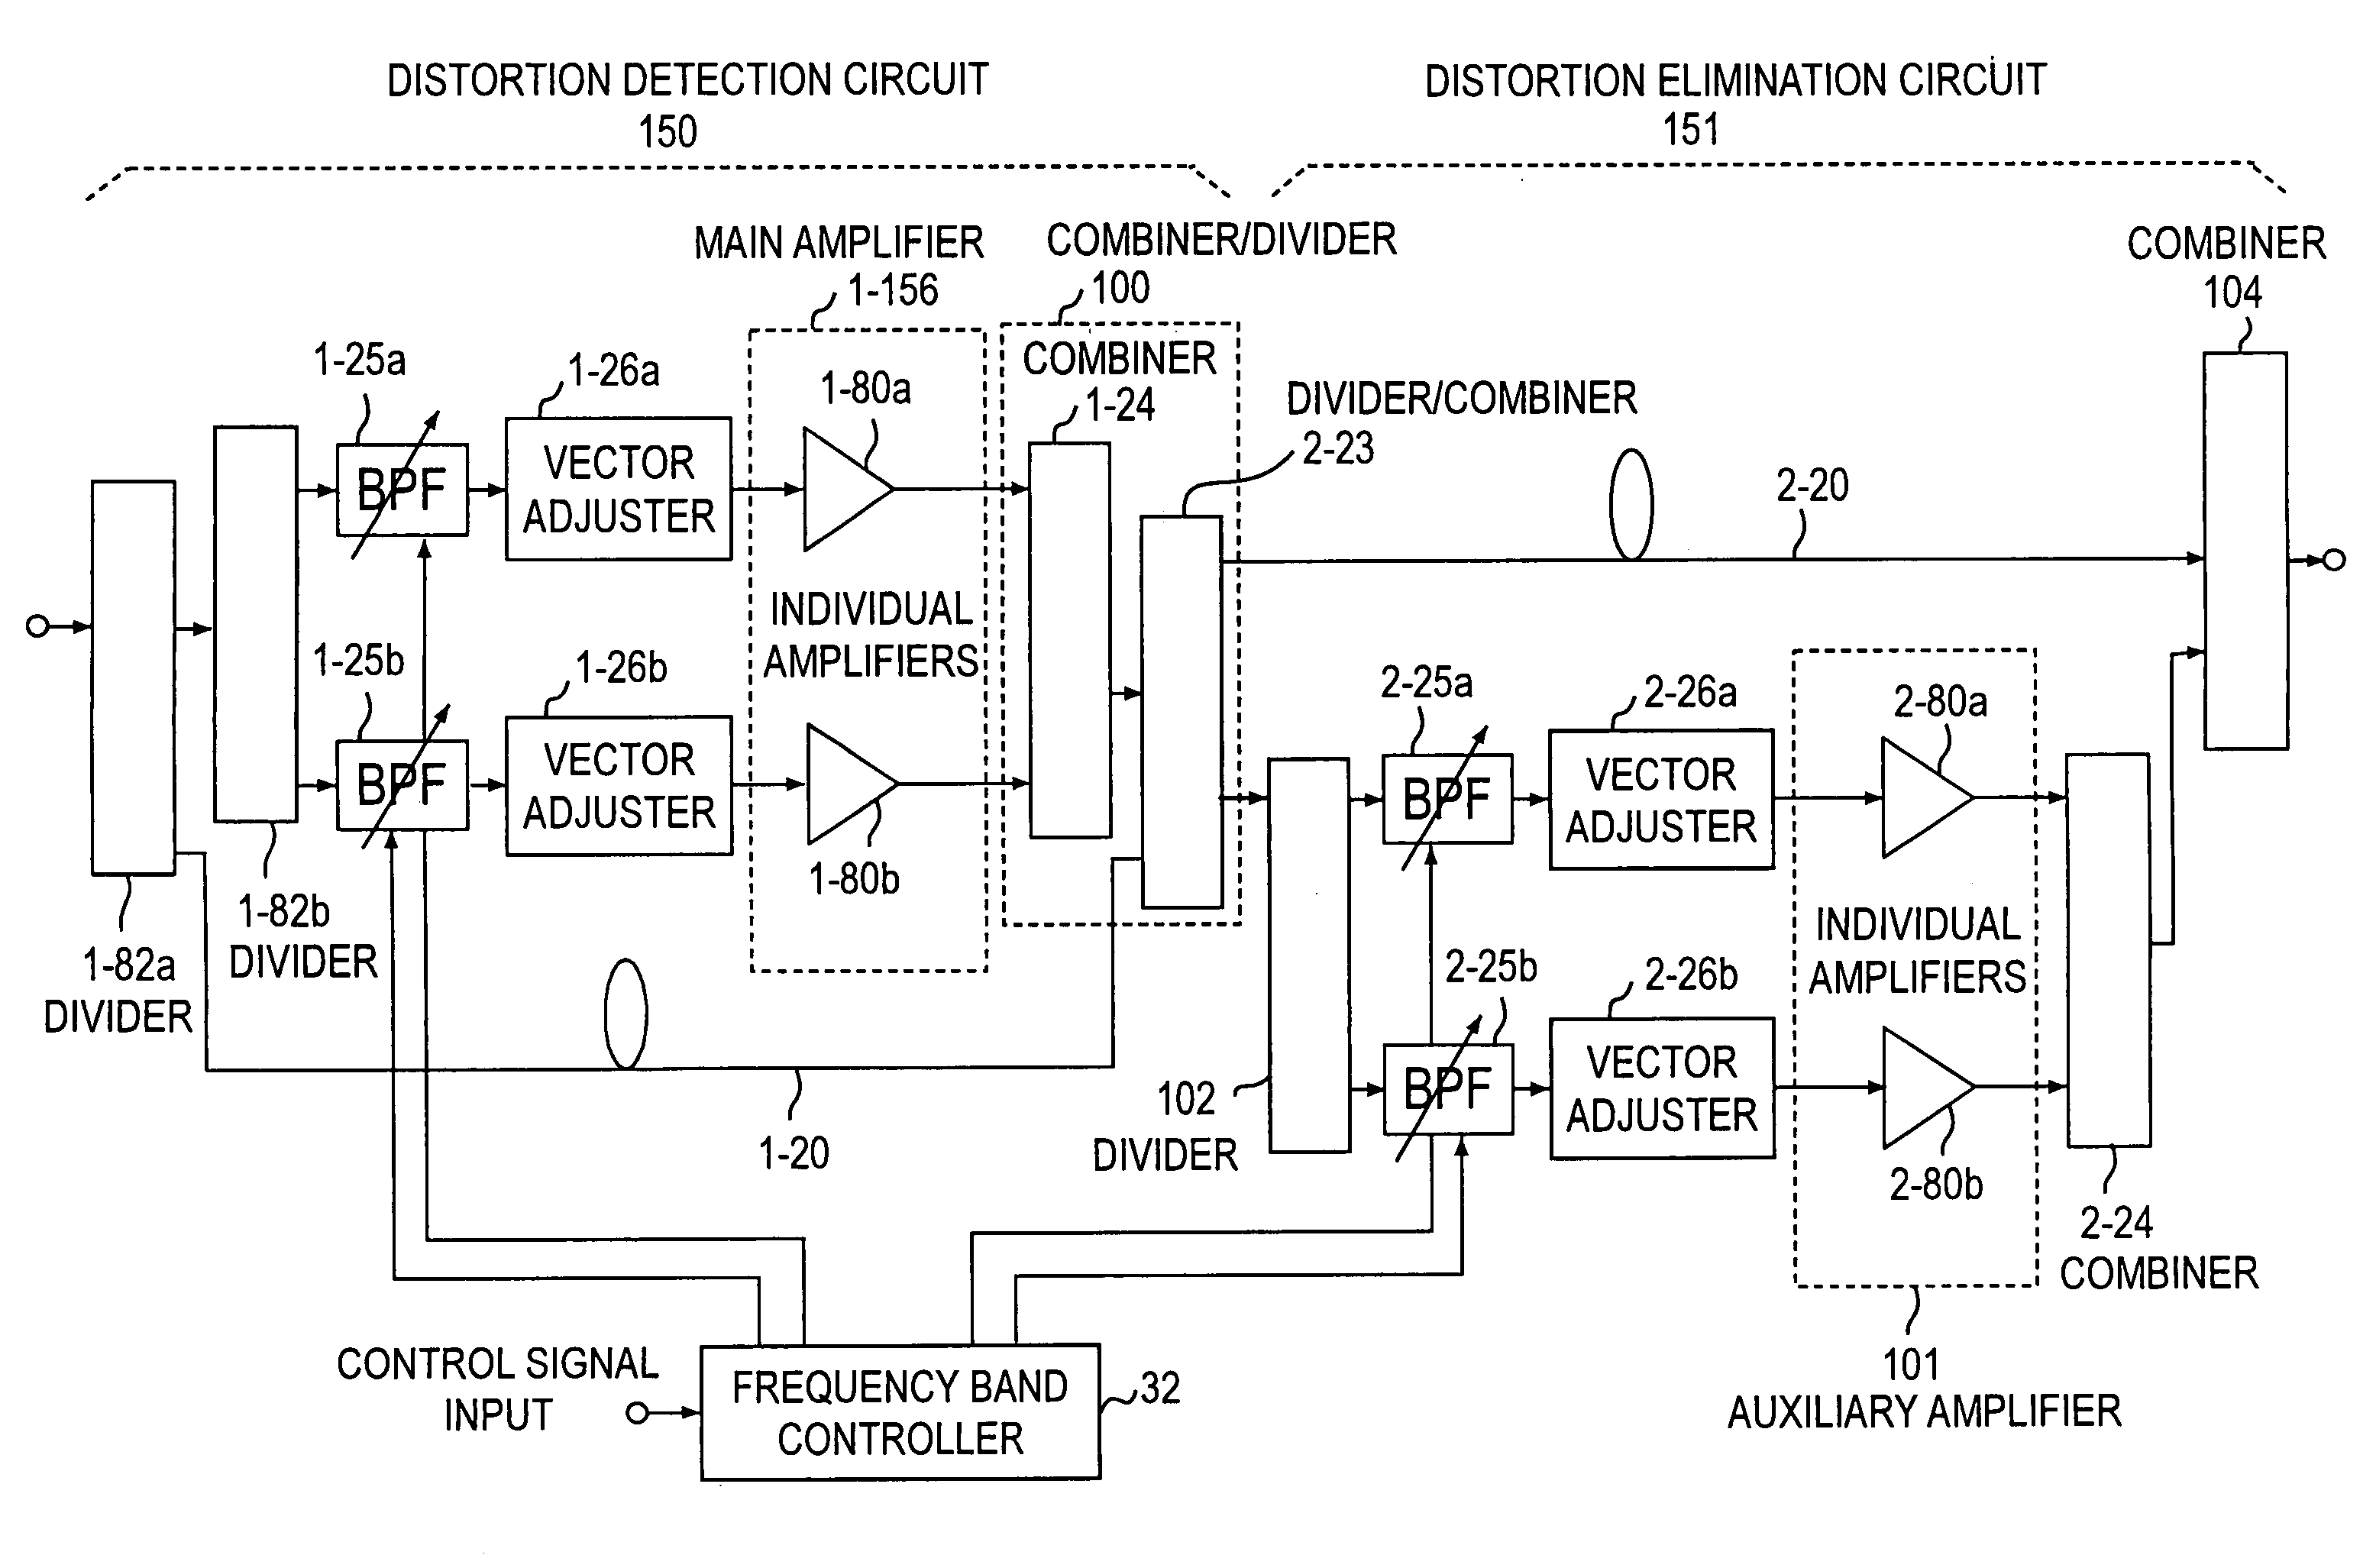 Feed forward amplifier for multiple frequency bands